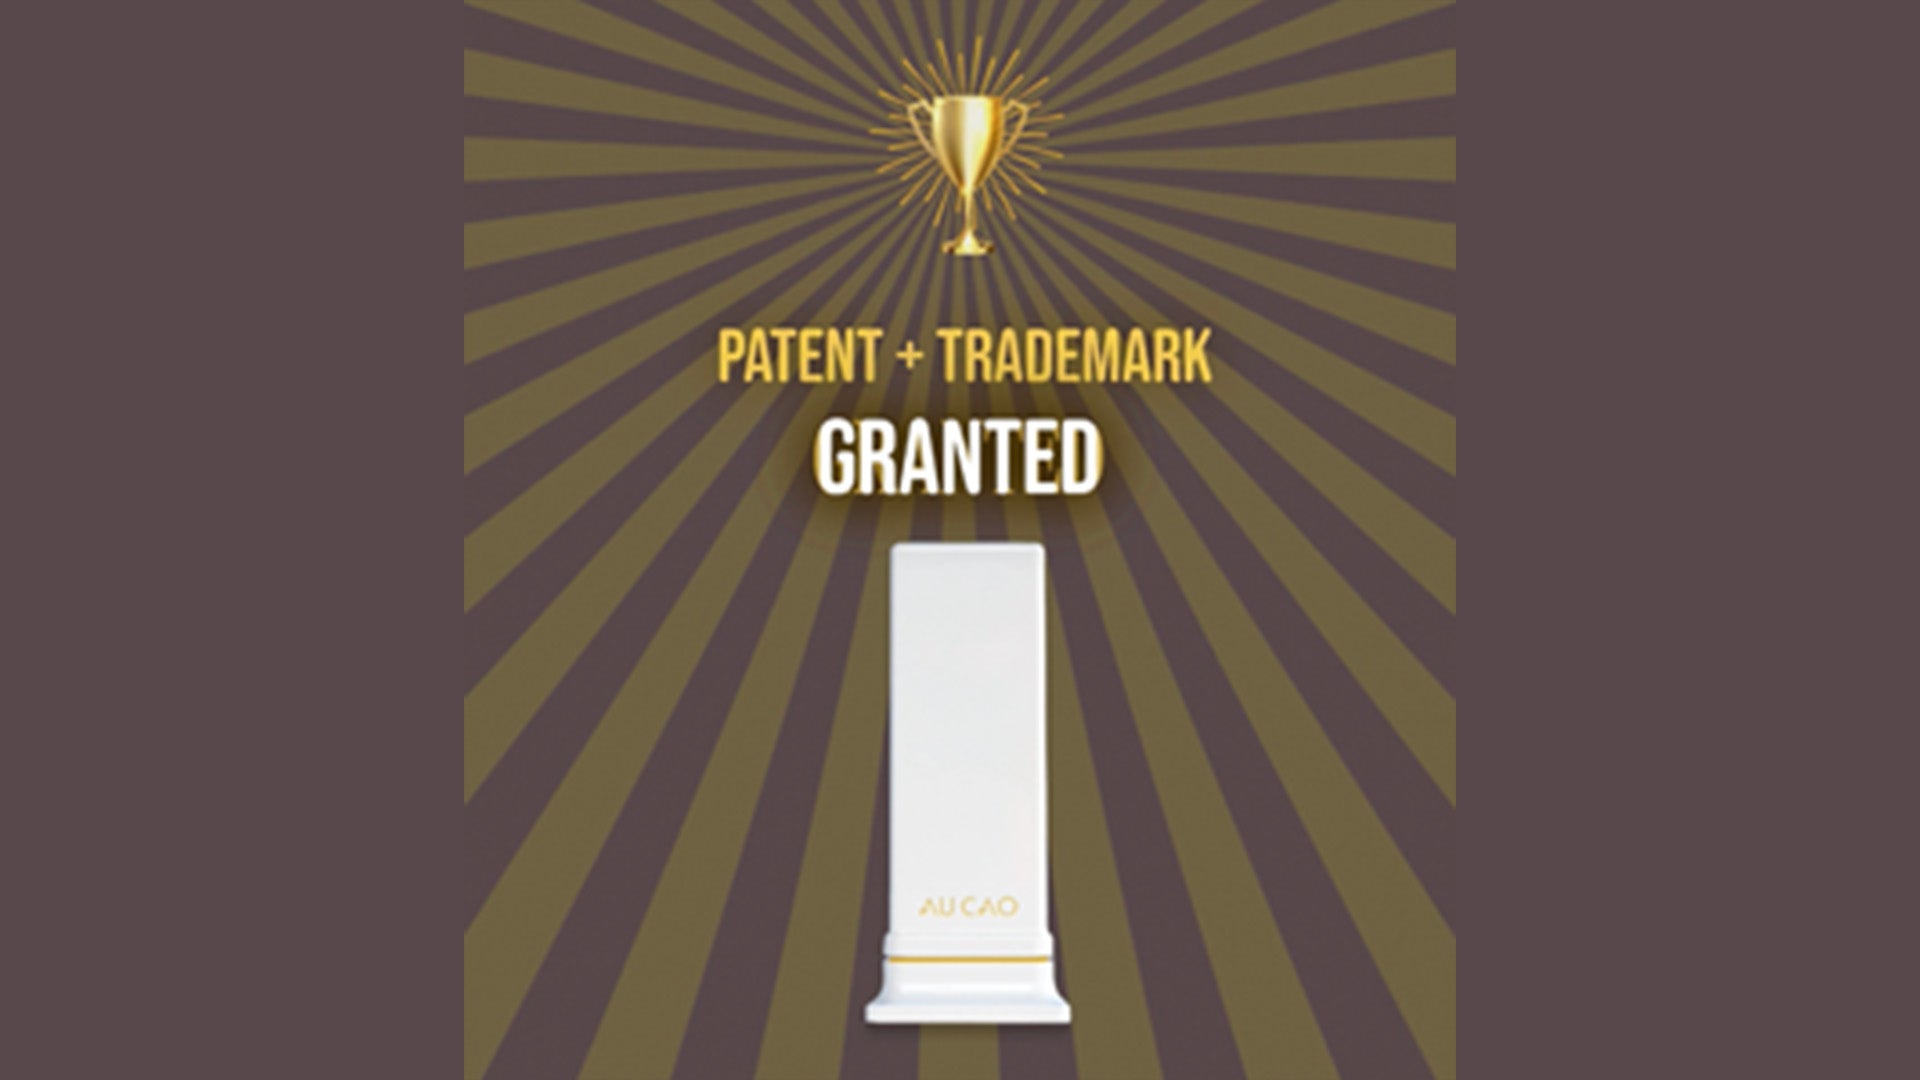 Patent and Trademark granted